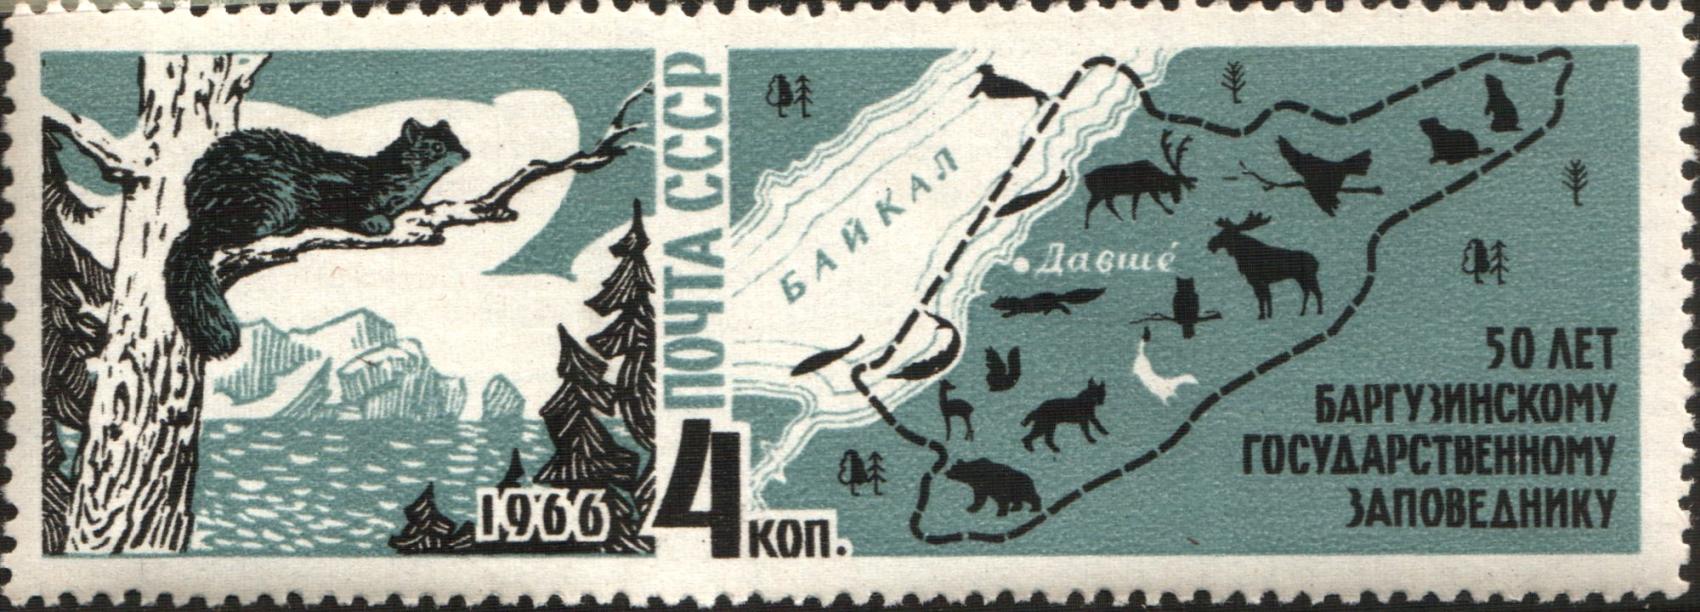 stamp with image of forest life on left and map on right